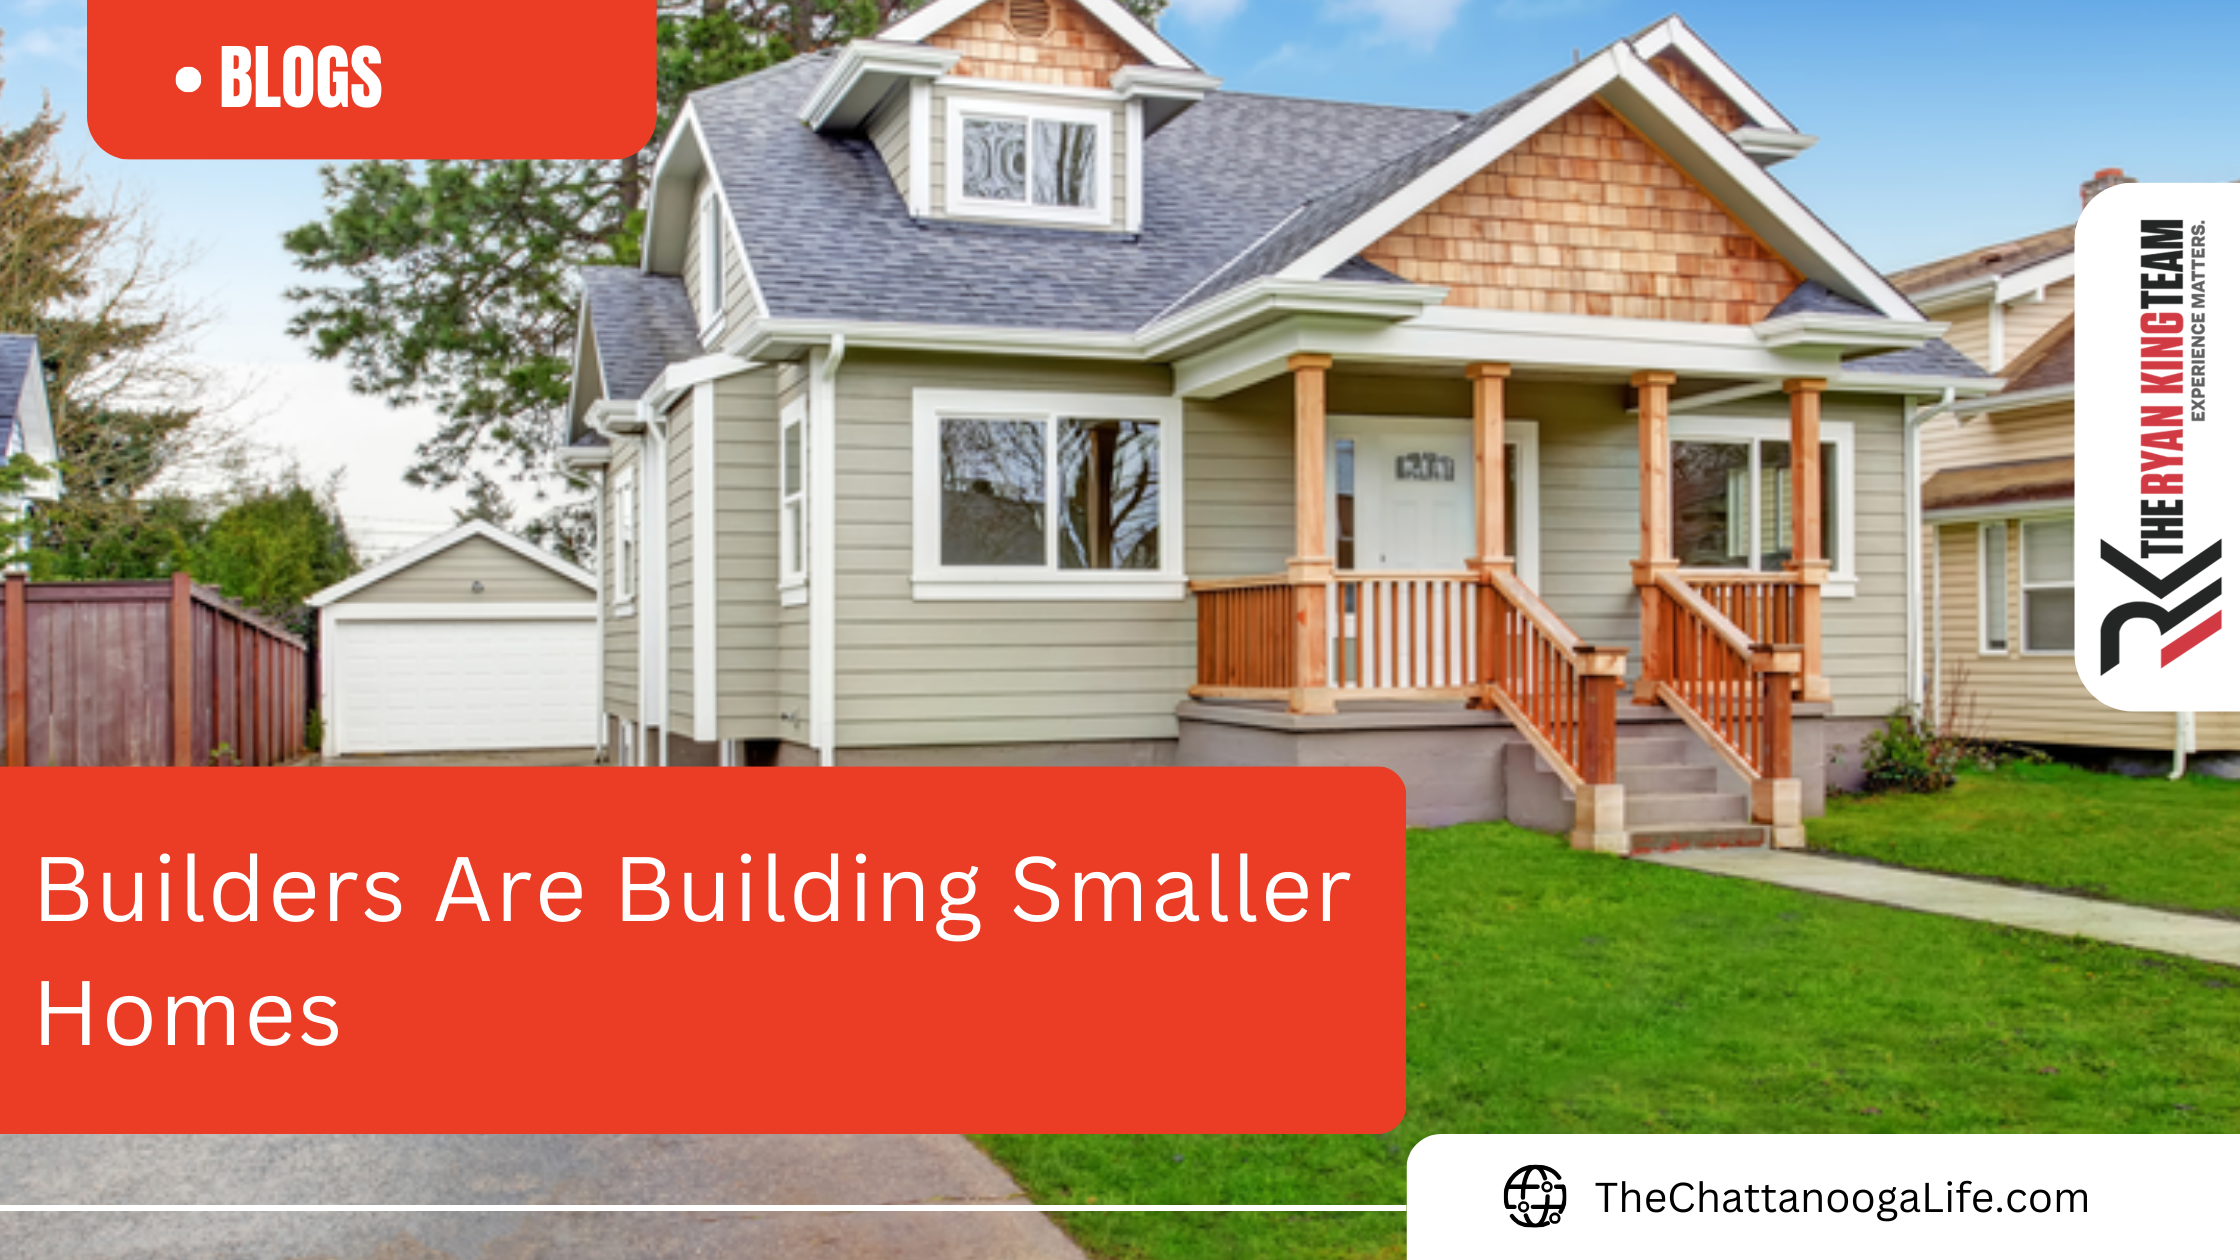 Builders Are Building Smaller Homes